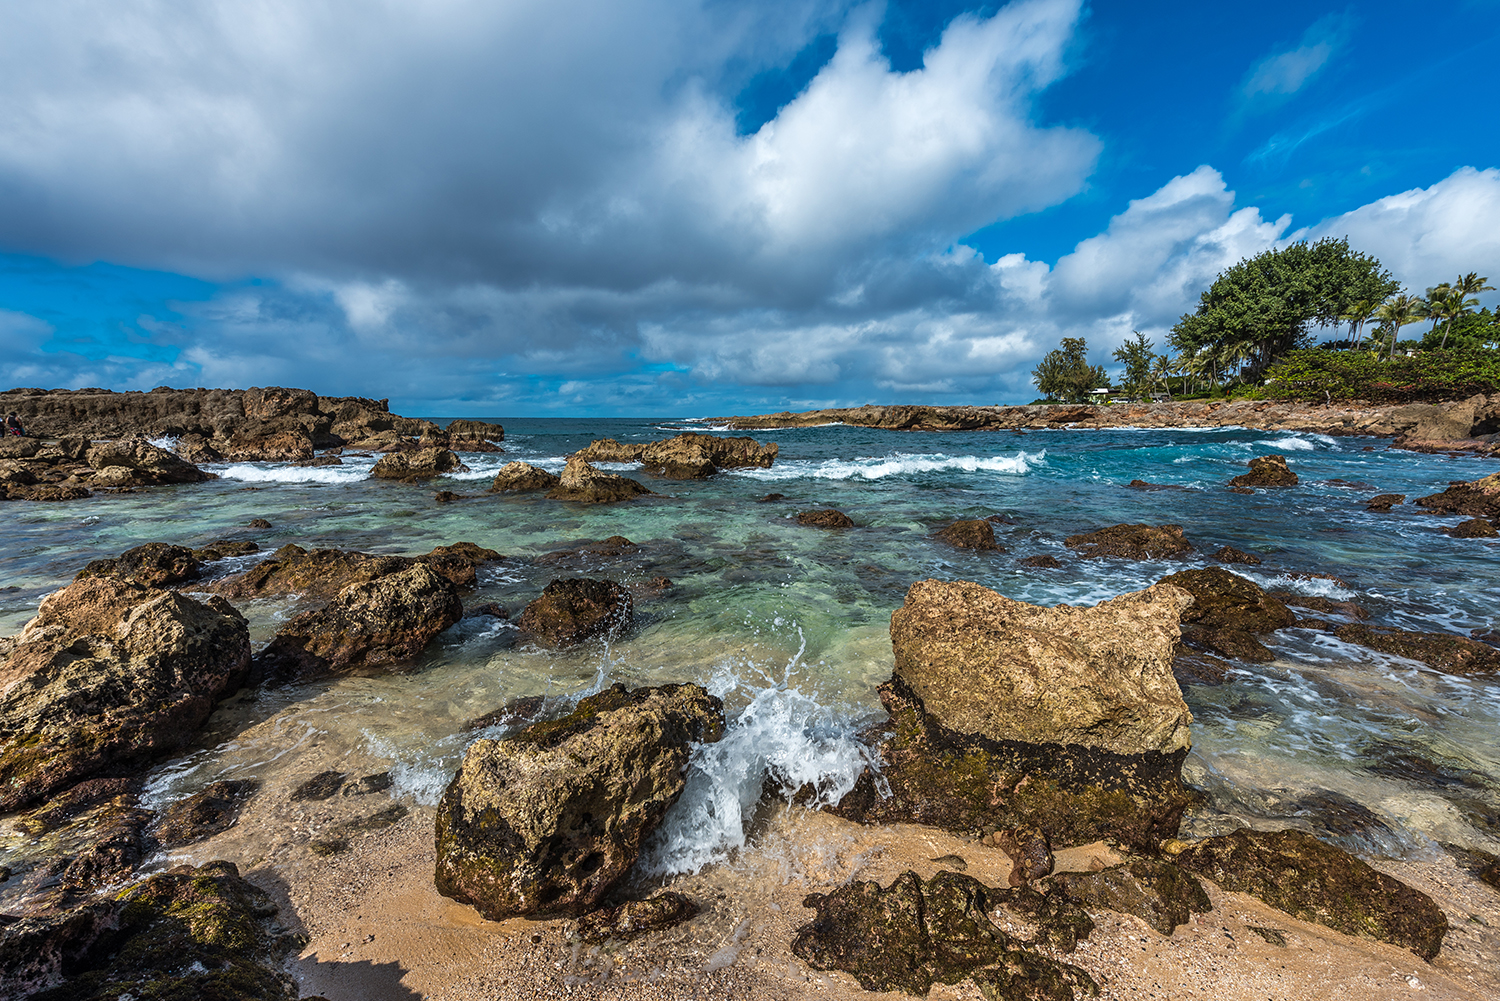 A topside view of Shark's Cove, which is an essential stop if you're scuba diving Oahu North Shore during the summer months